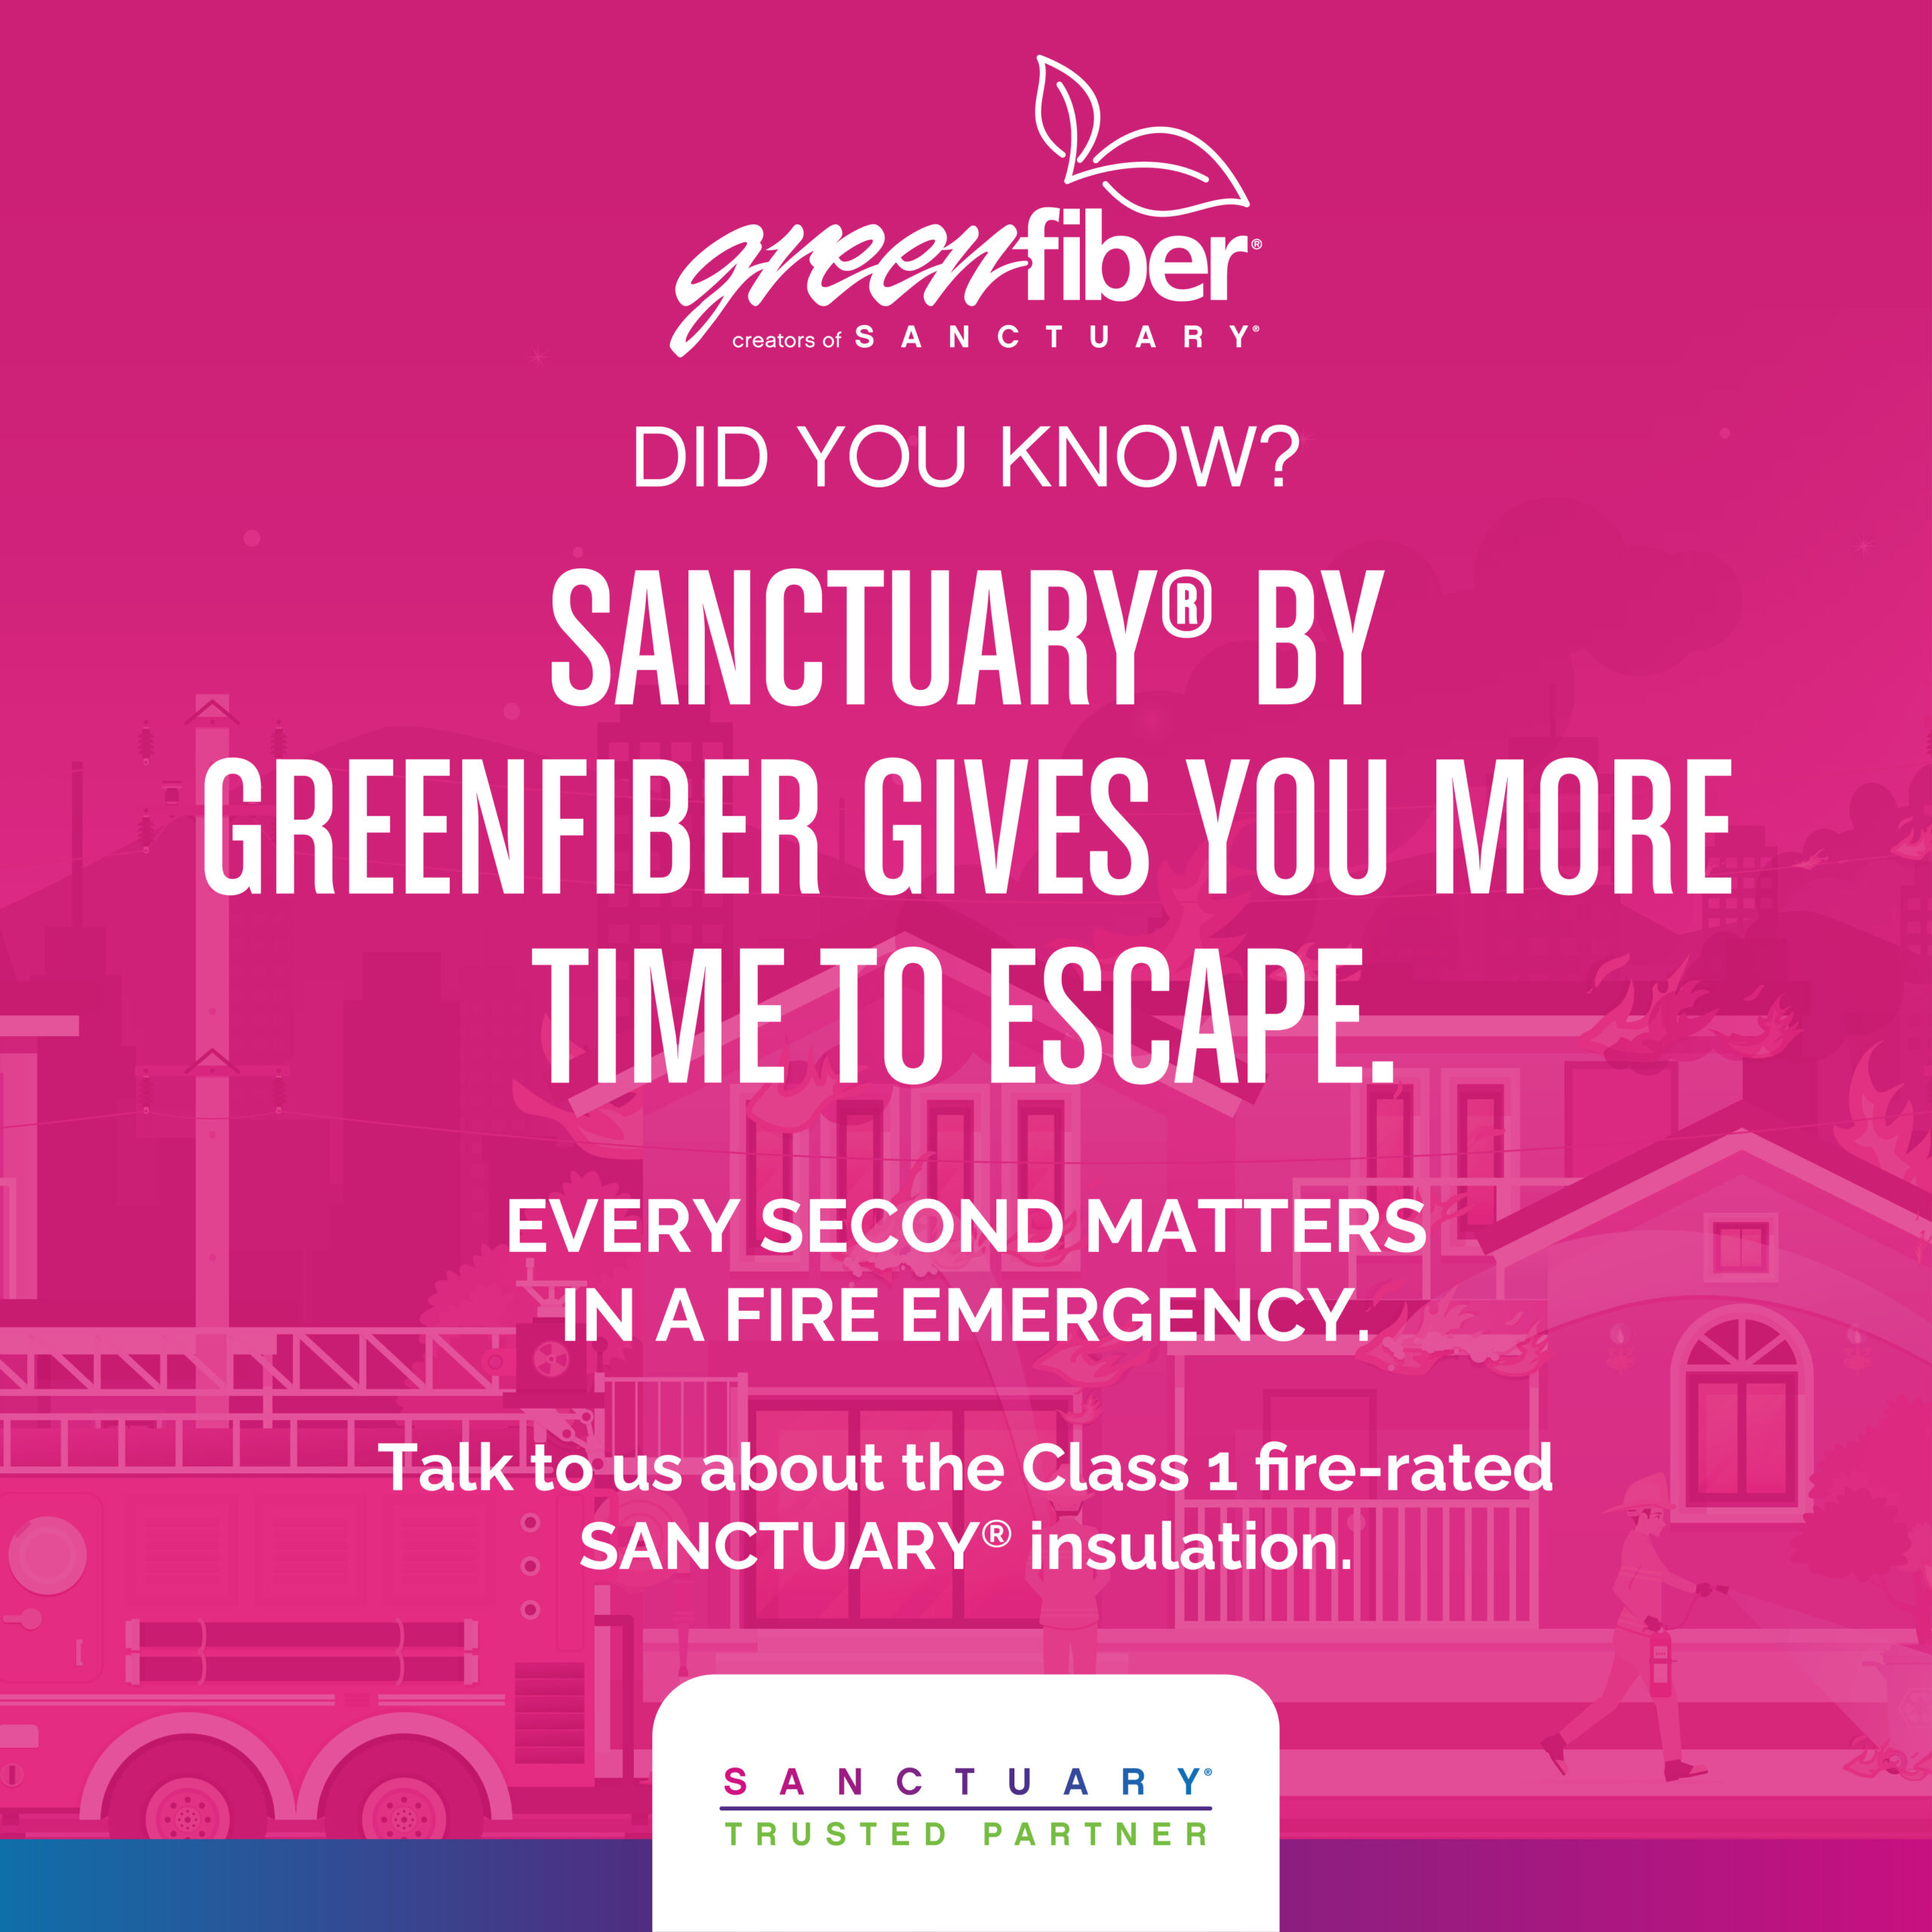 "Greenfiber creators of Sanctuary. Did you know? Sanctuary by greenfiber gives you more time to escape. Every second matters in a fire emergency. Talk to us about the class 1 fire-rated sanctuary insulation. Sanctuary Trusted Partner."